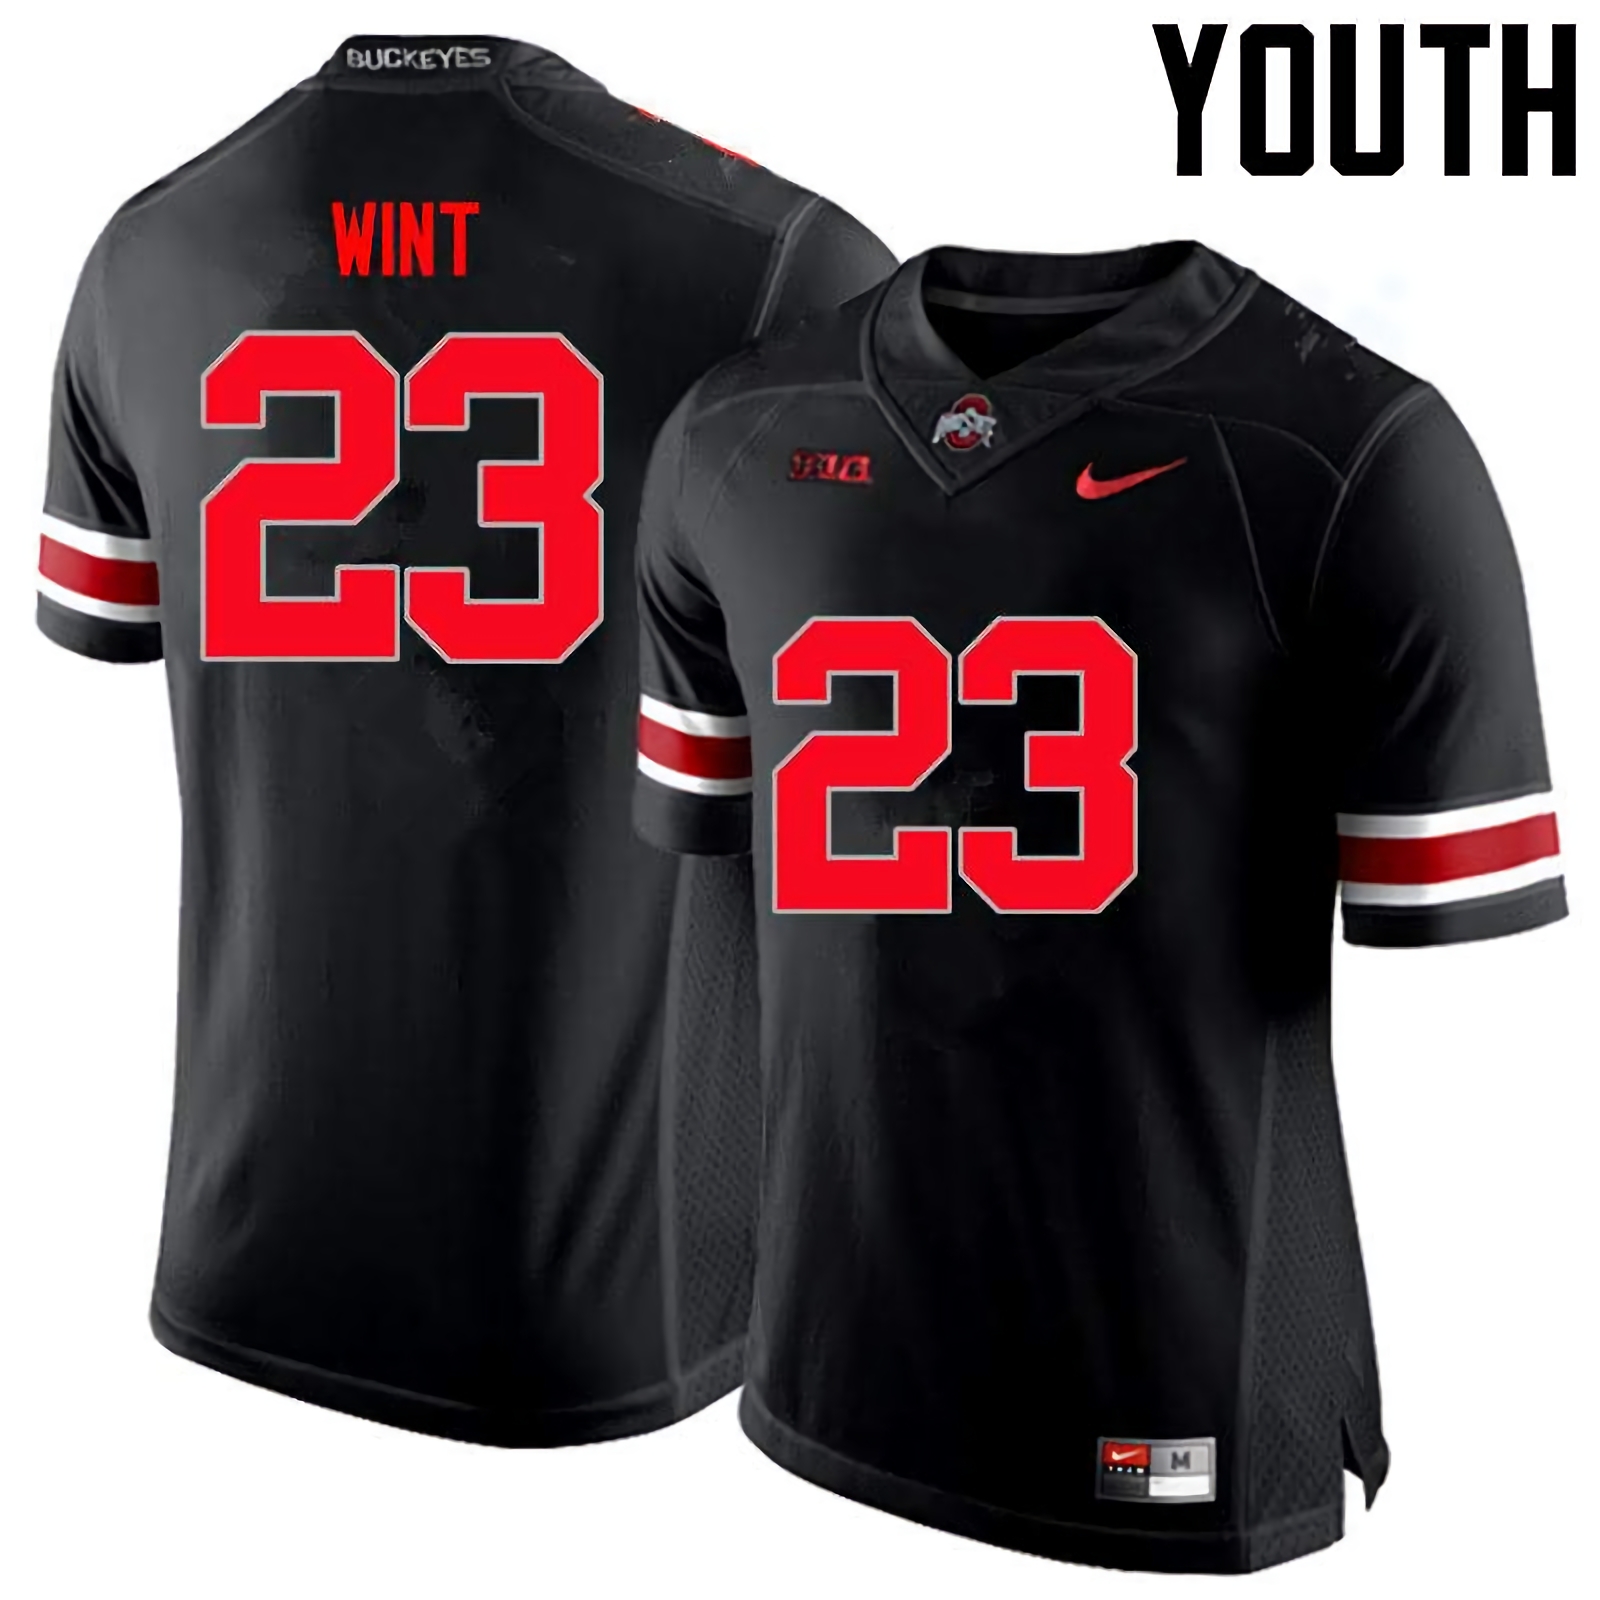 Jahsen Wint Ohio State Buckeyes Youth NCAA #23 Nike Black Limited College Stitched Football Jersey DEV0256EH